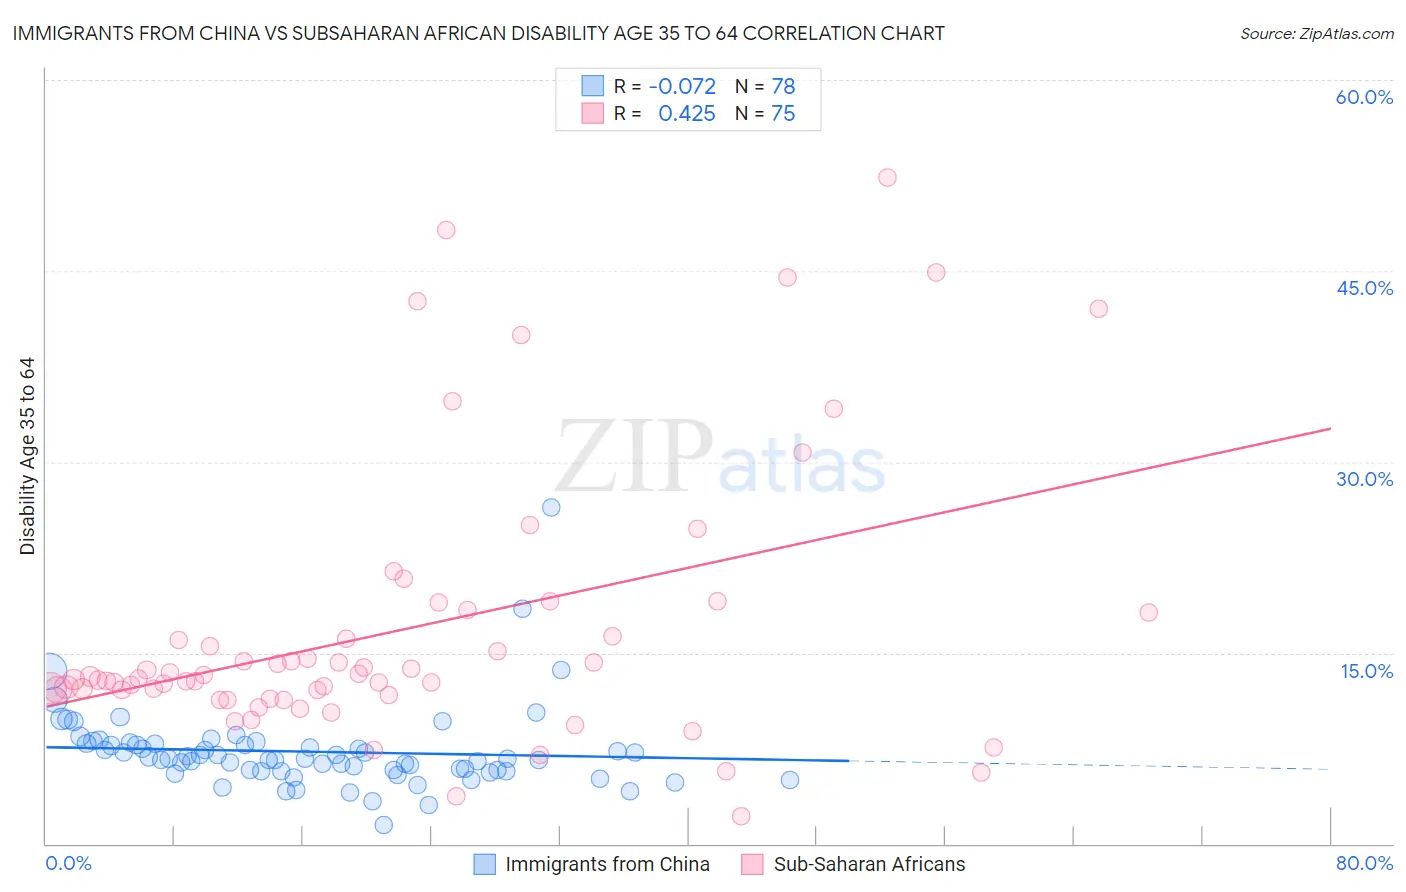 Immigrants from China vs Subsaharan African Disability Age 35 to 64